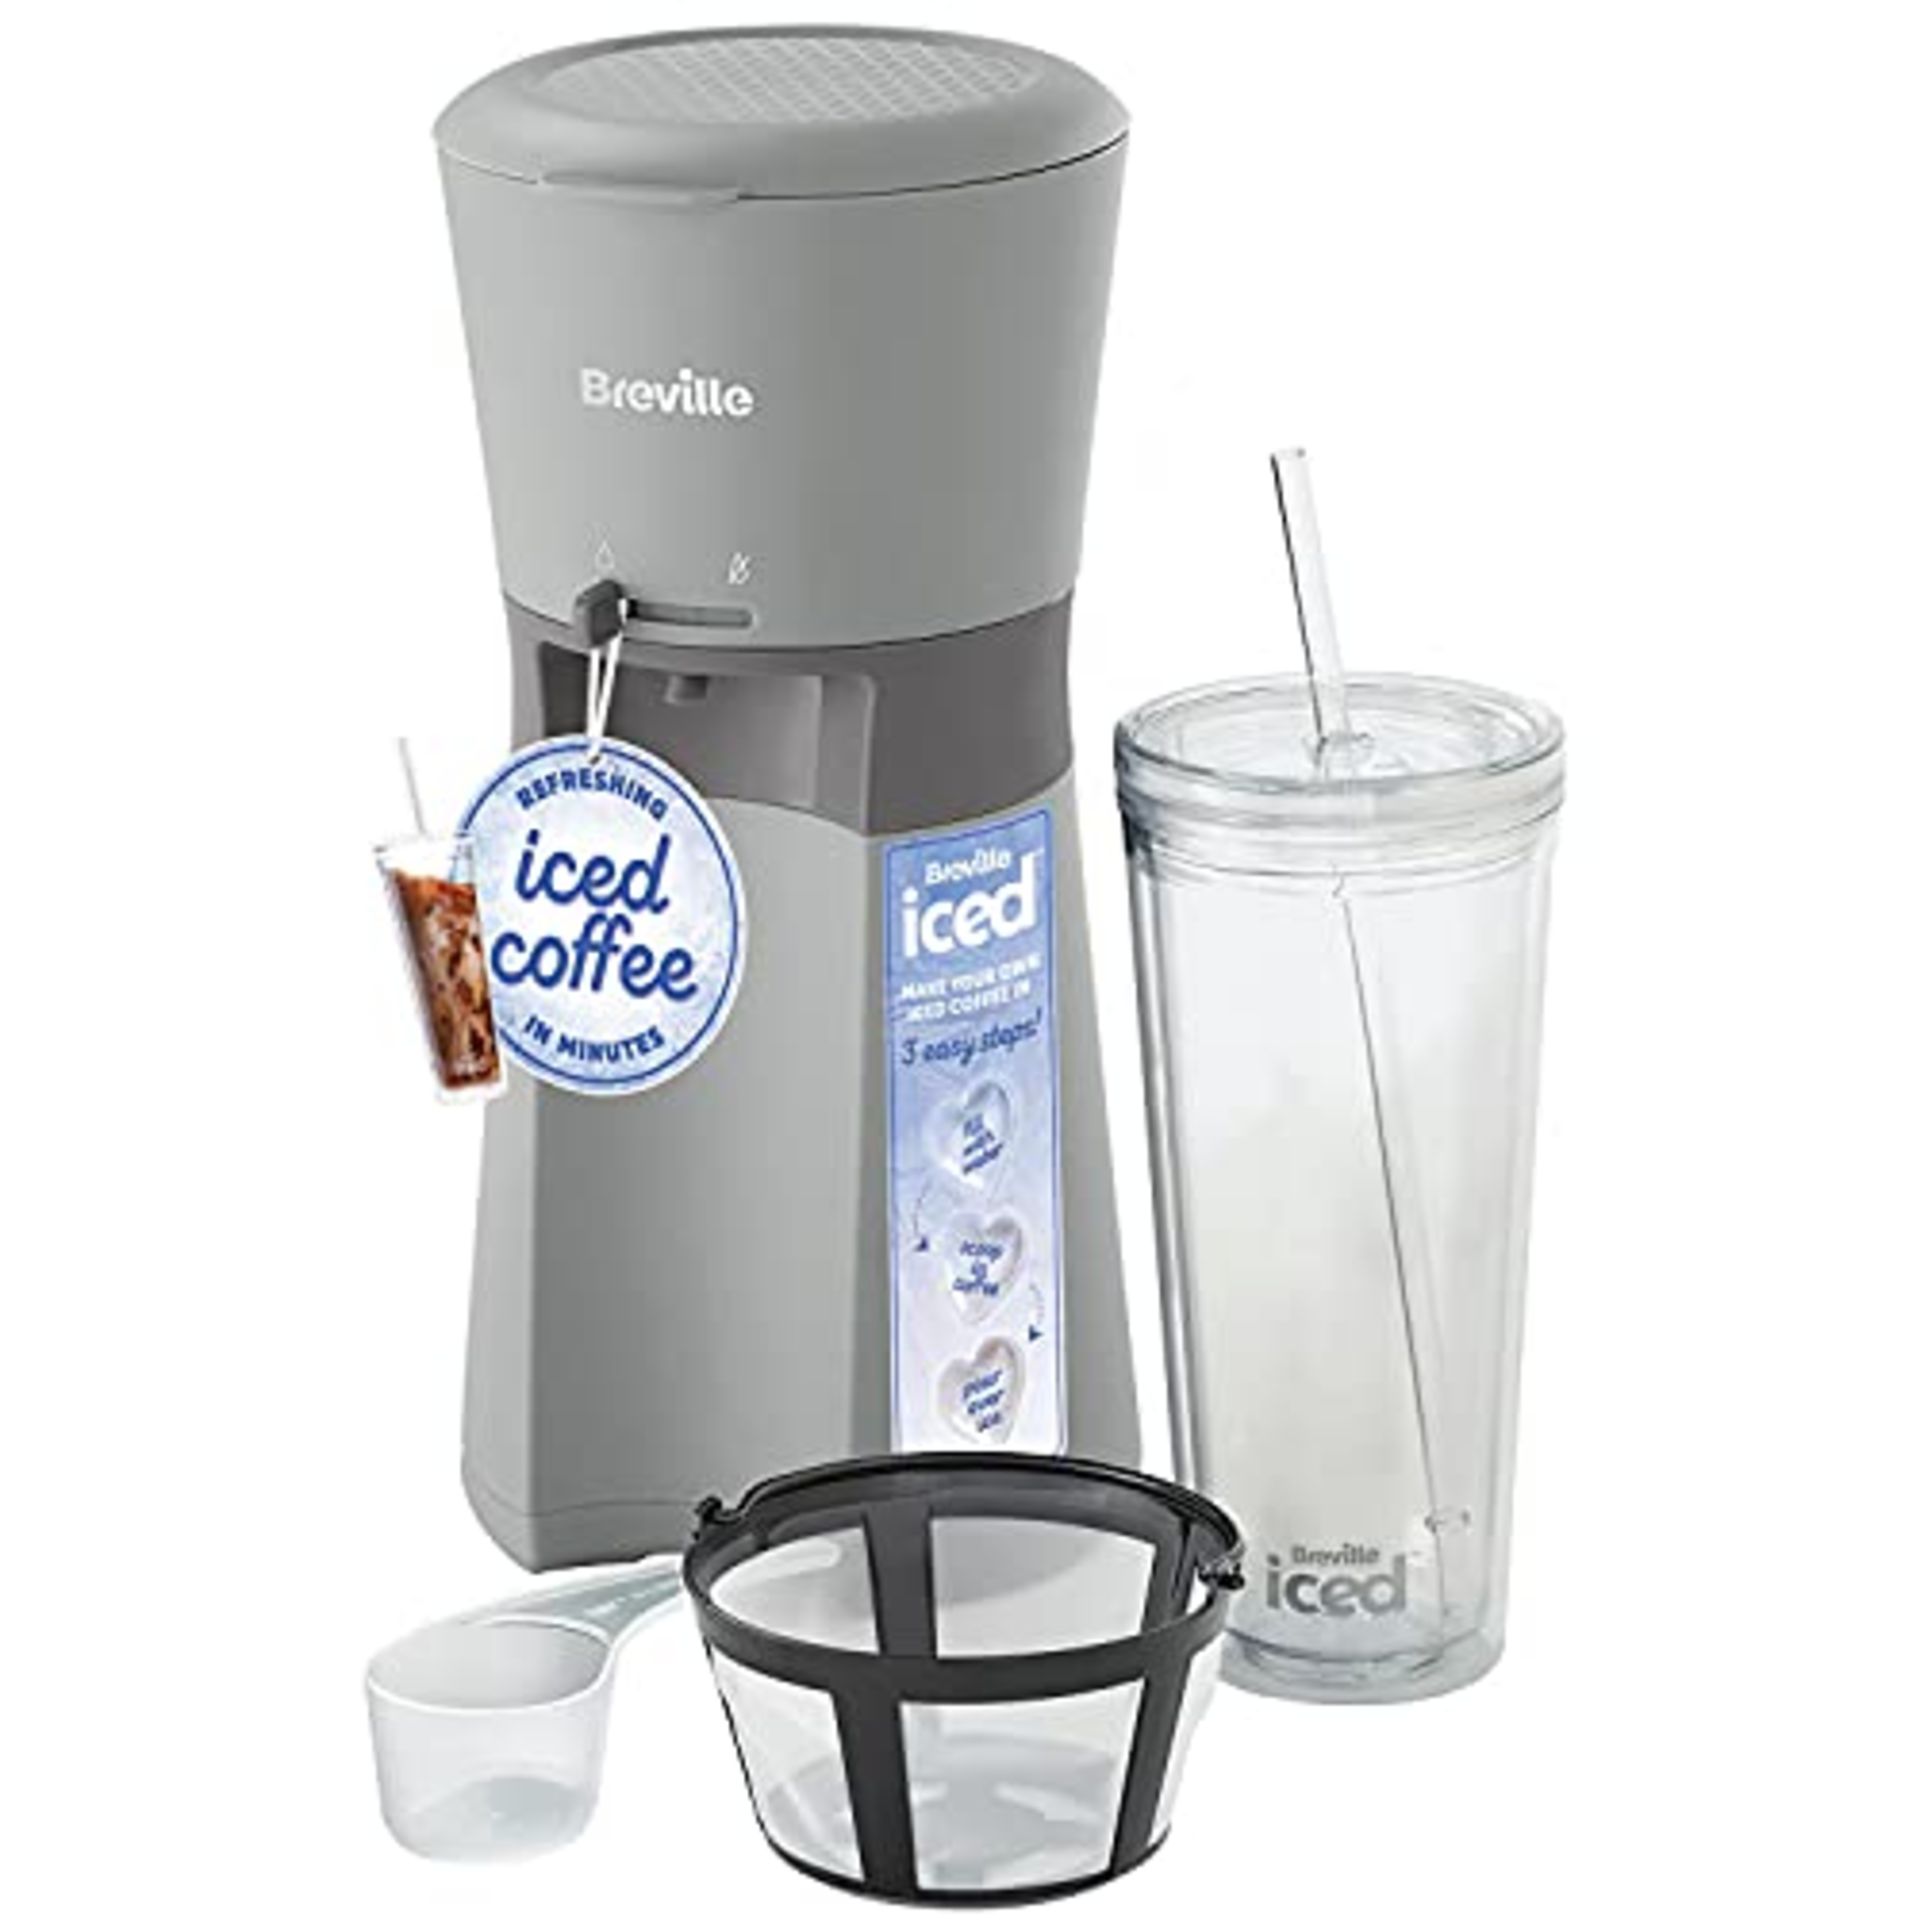 Breville Iced Coffee Maker | Single Serve Iced Coffee Machine Plus Coffee Cup with Str